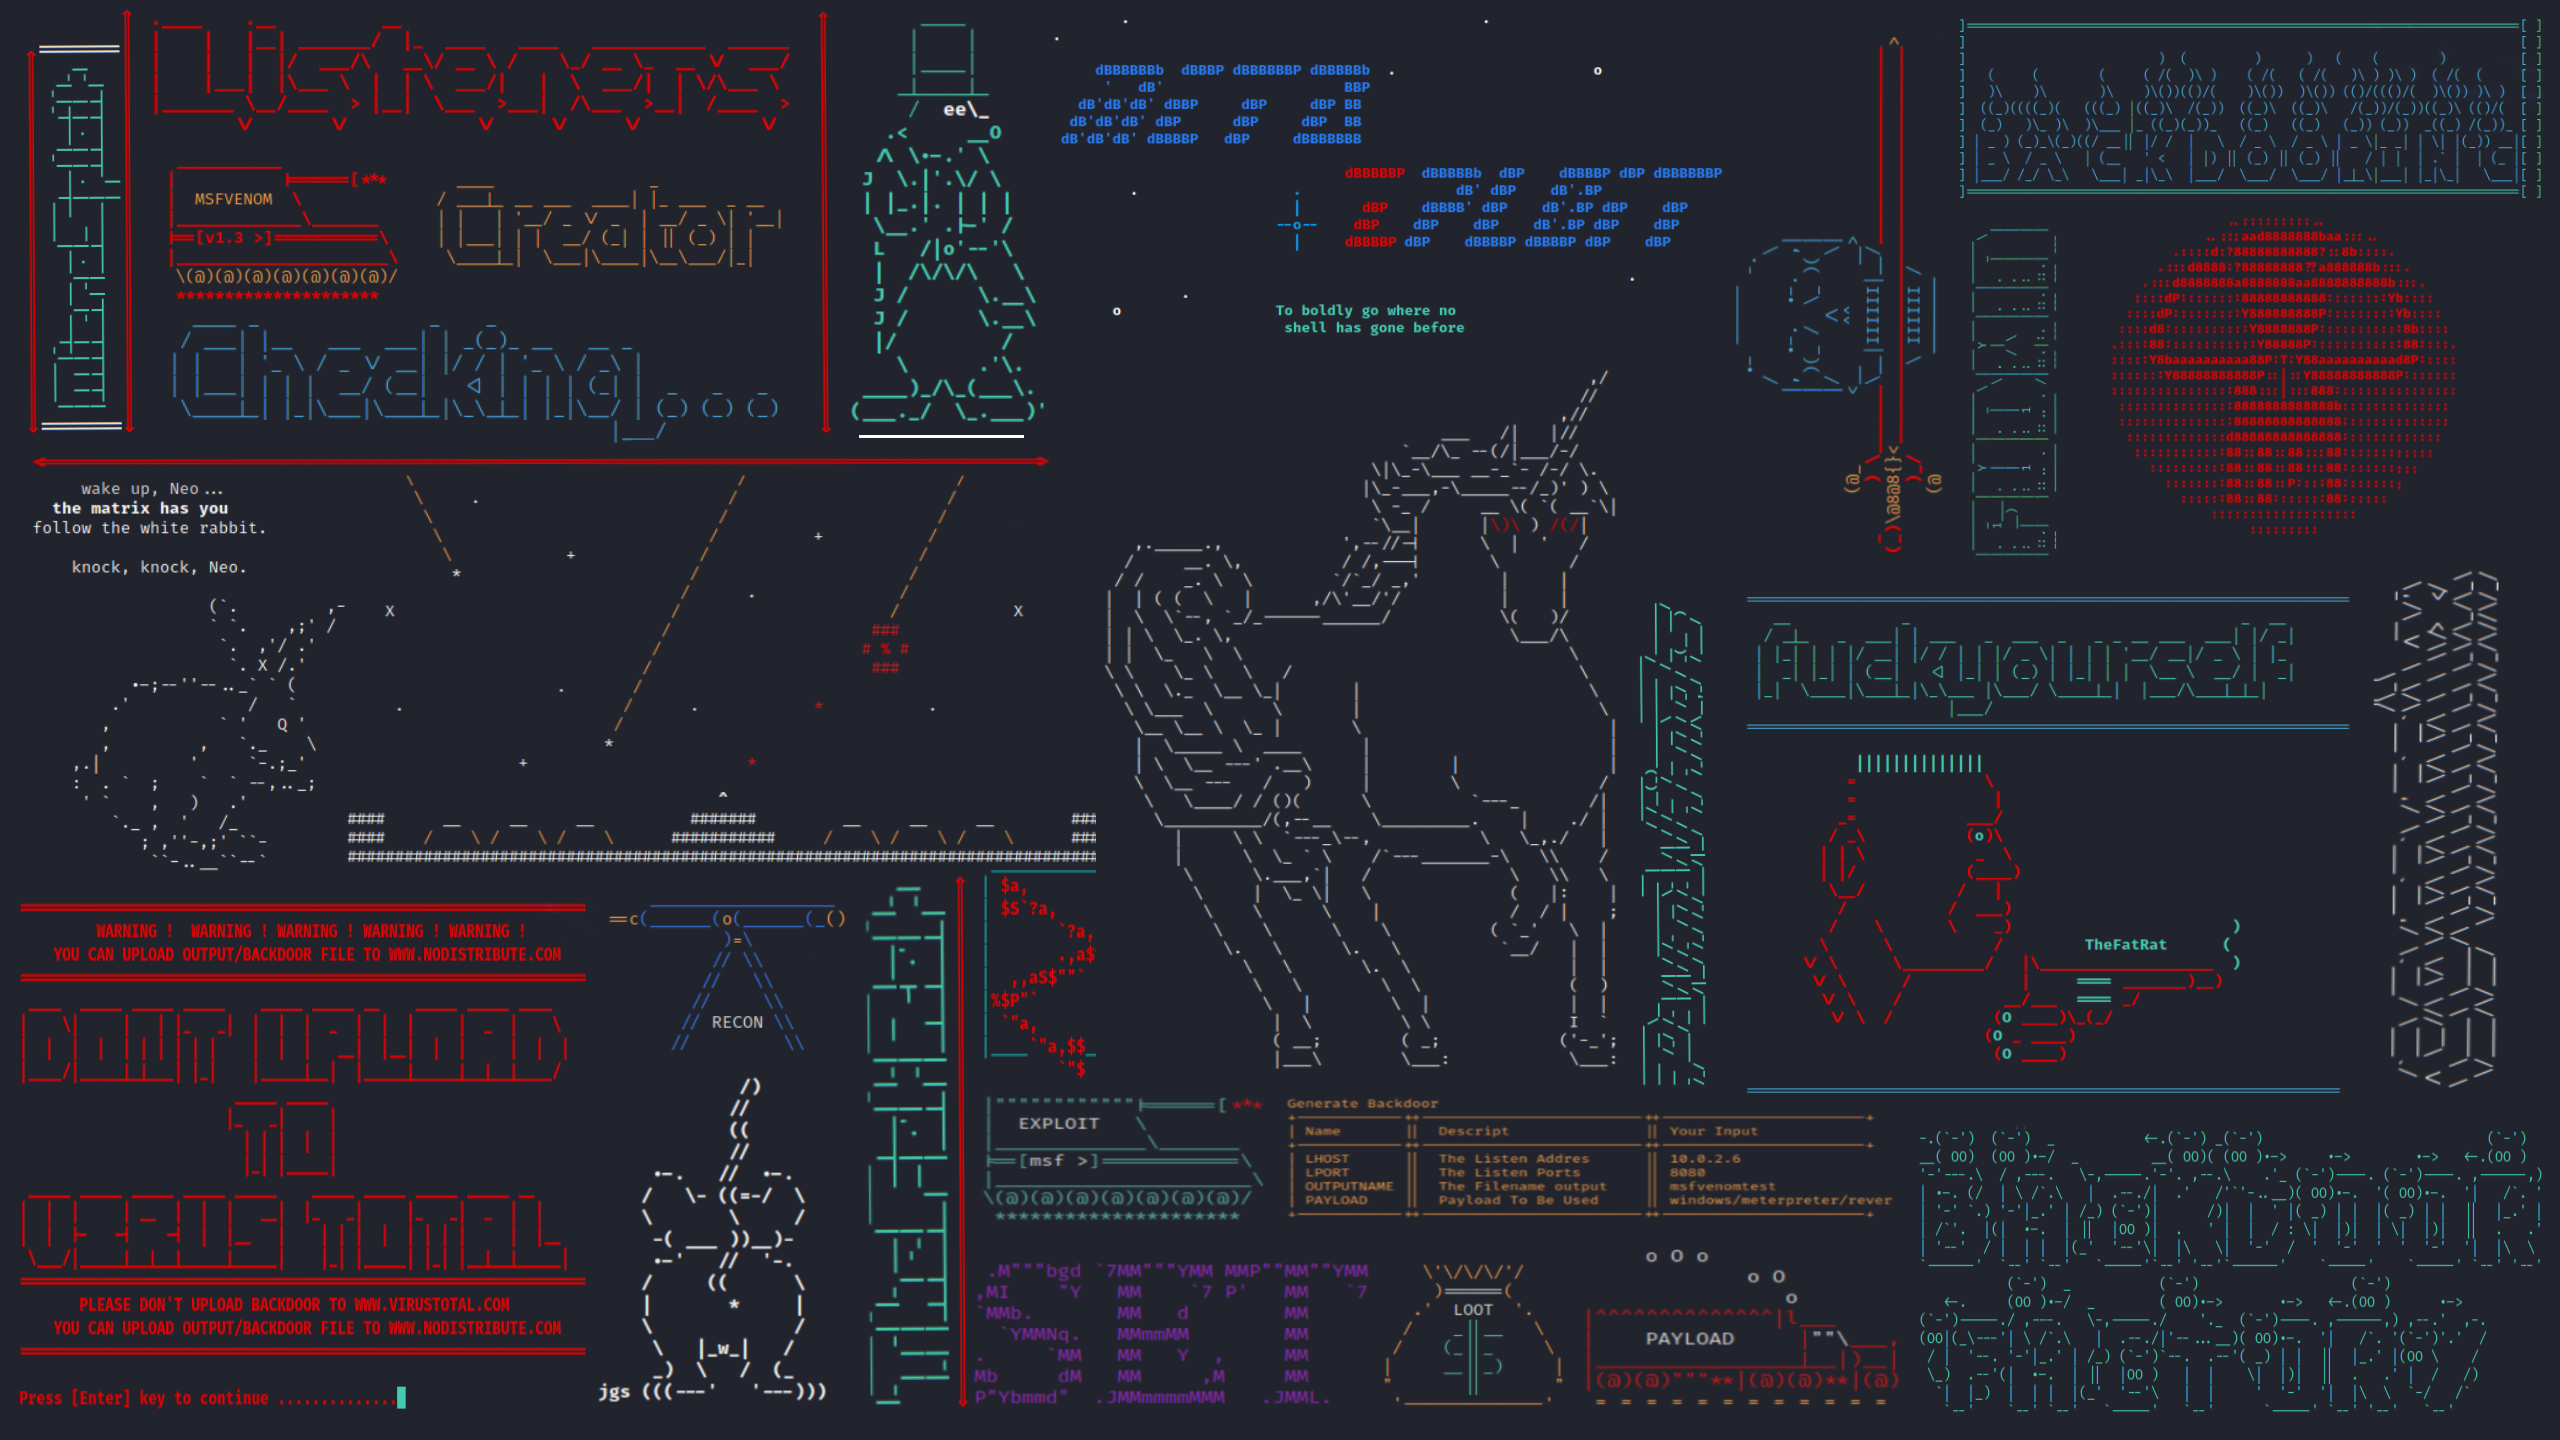 Reupload with retouched colors for more vibrant image: I made a wallpaper from the ASCII art from various programs